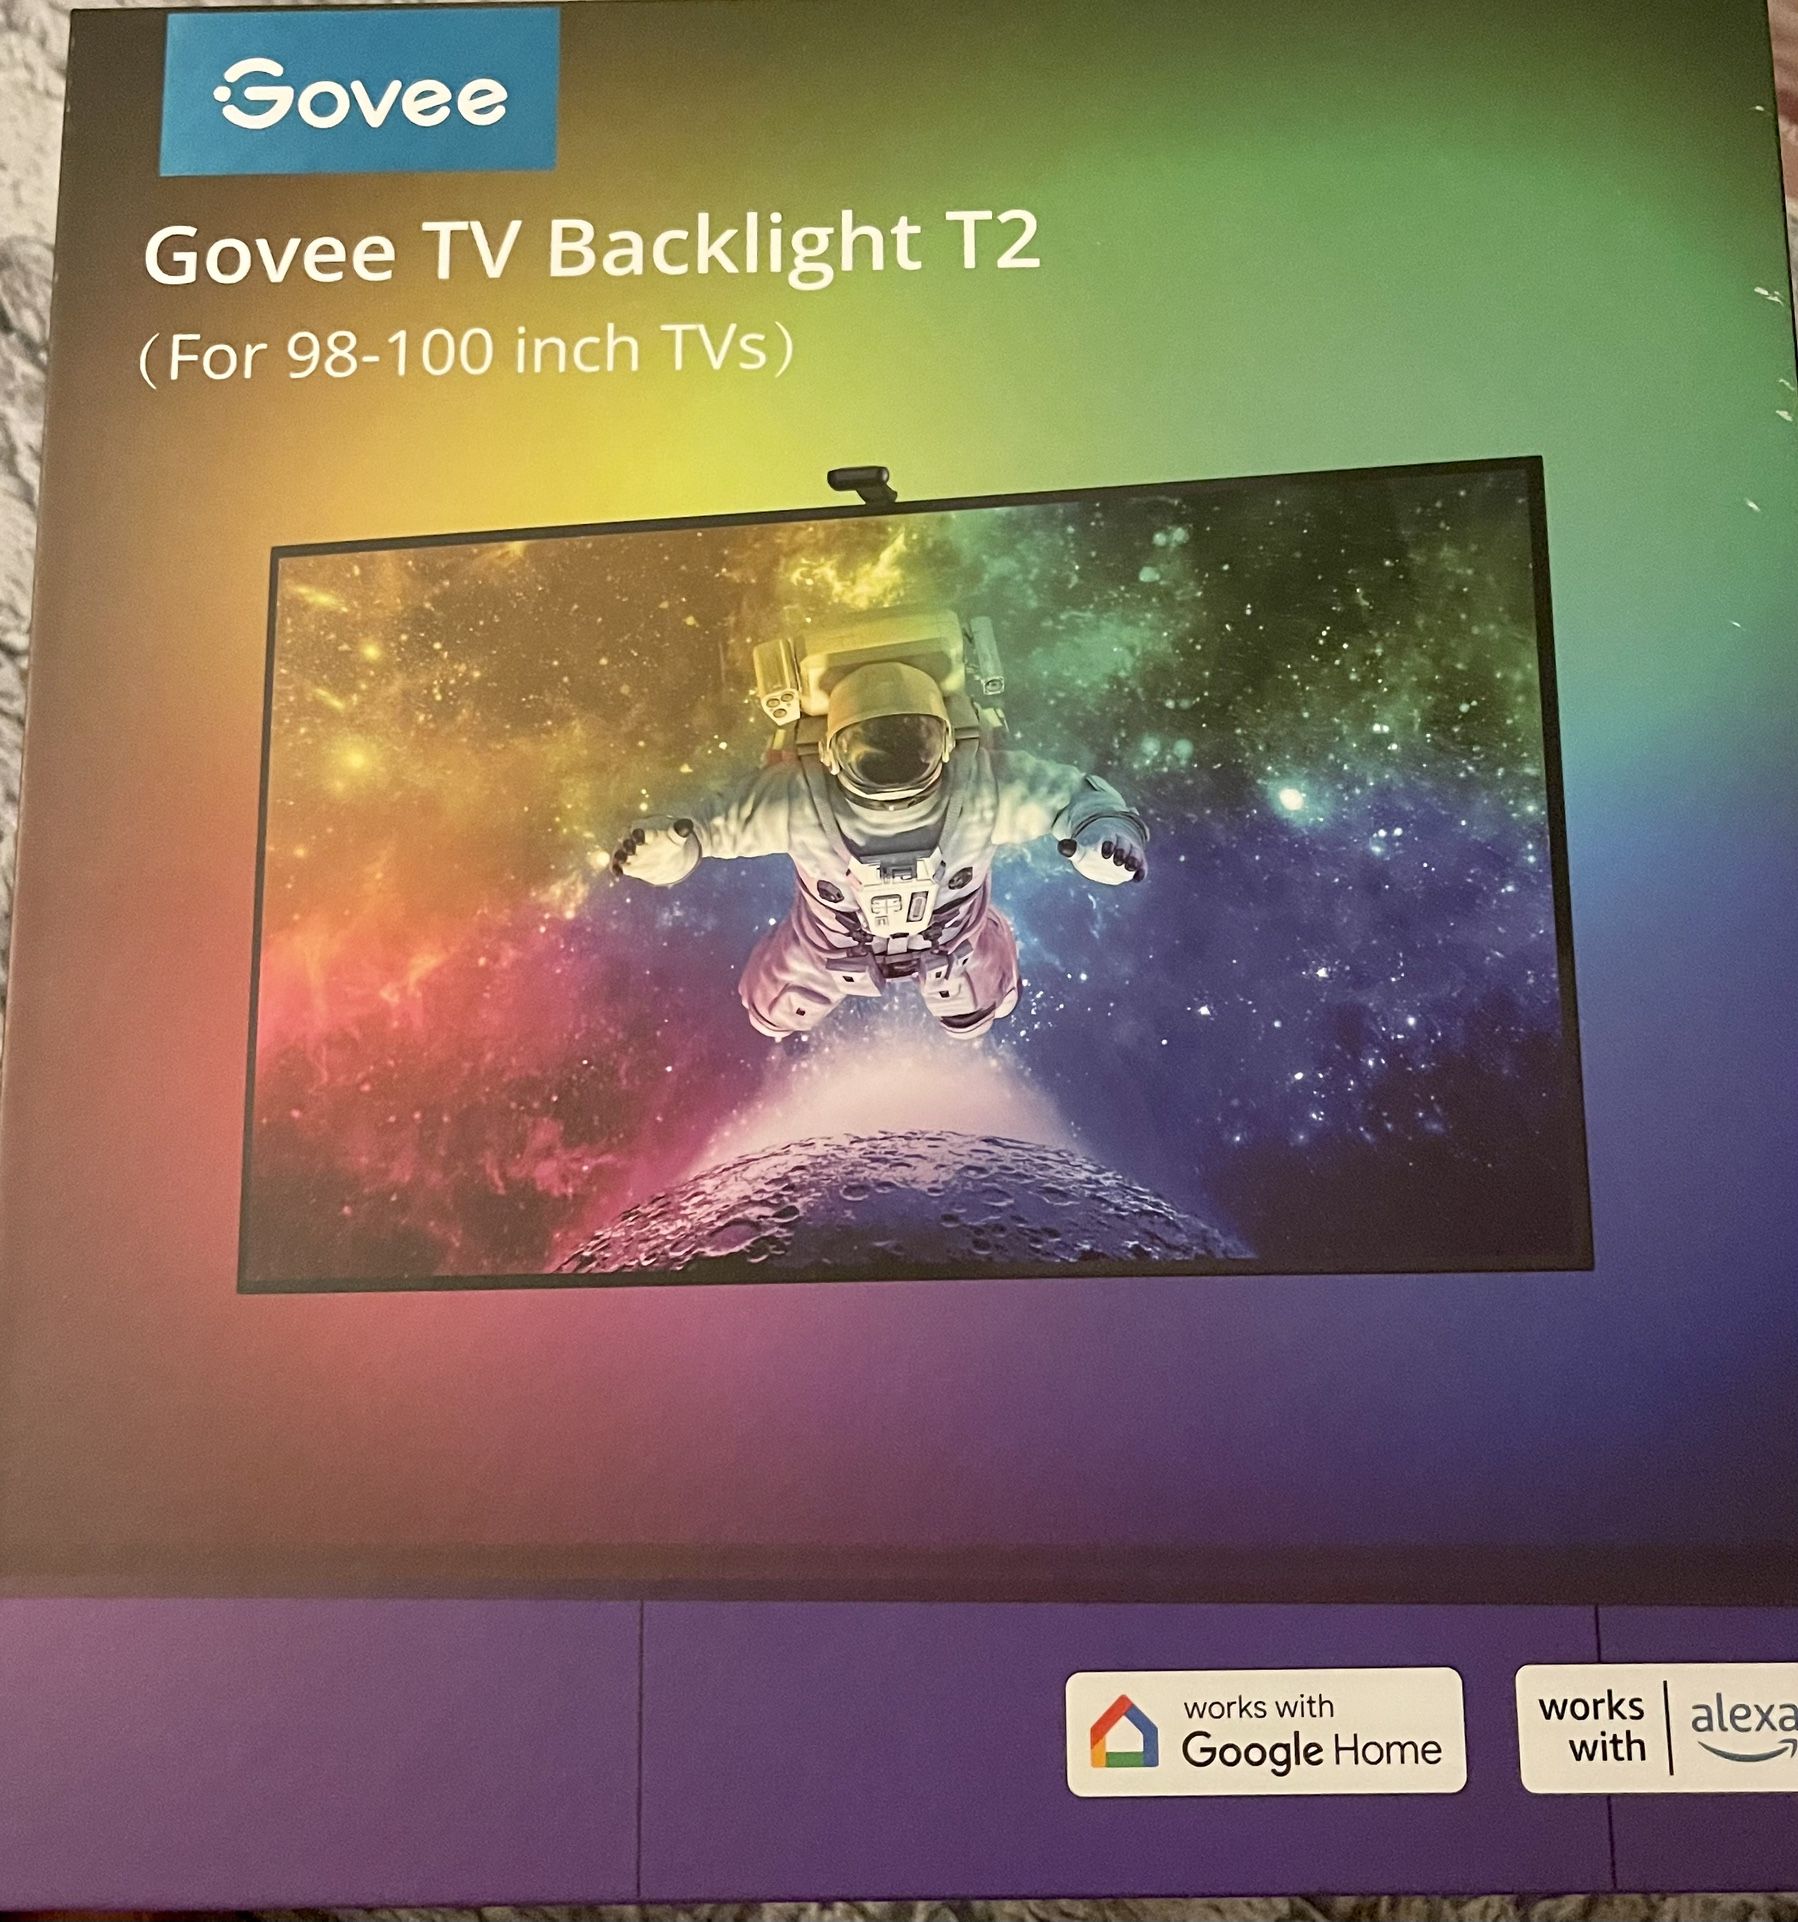  Govee Envisual TV LED Backlight T2 with Dual Cameras, 21ft  RGBIC Wi-Fi LED Strip Lights for 98-100 inch TVs, Double Strip Light Beads,  Adapts to Ultra-Thin TVs, Smart App Control, Music